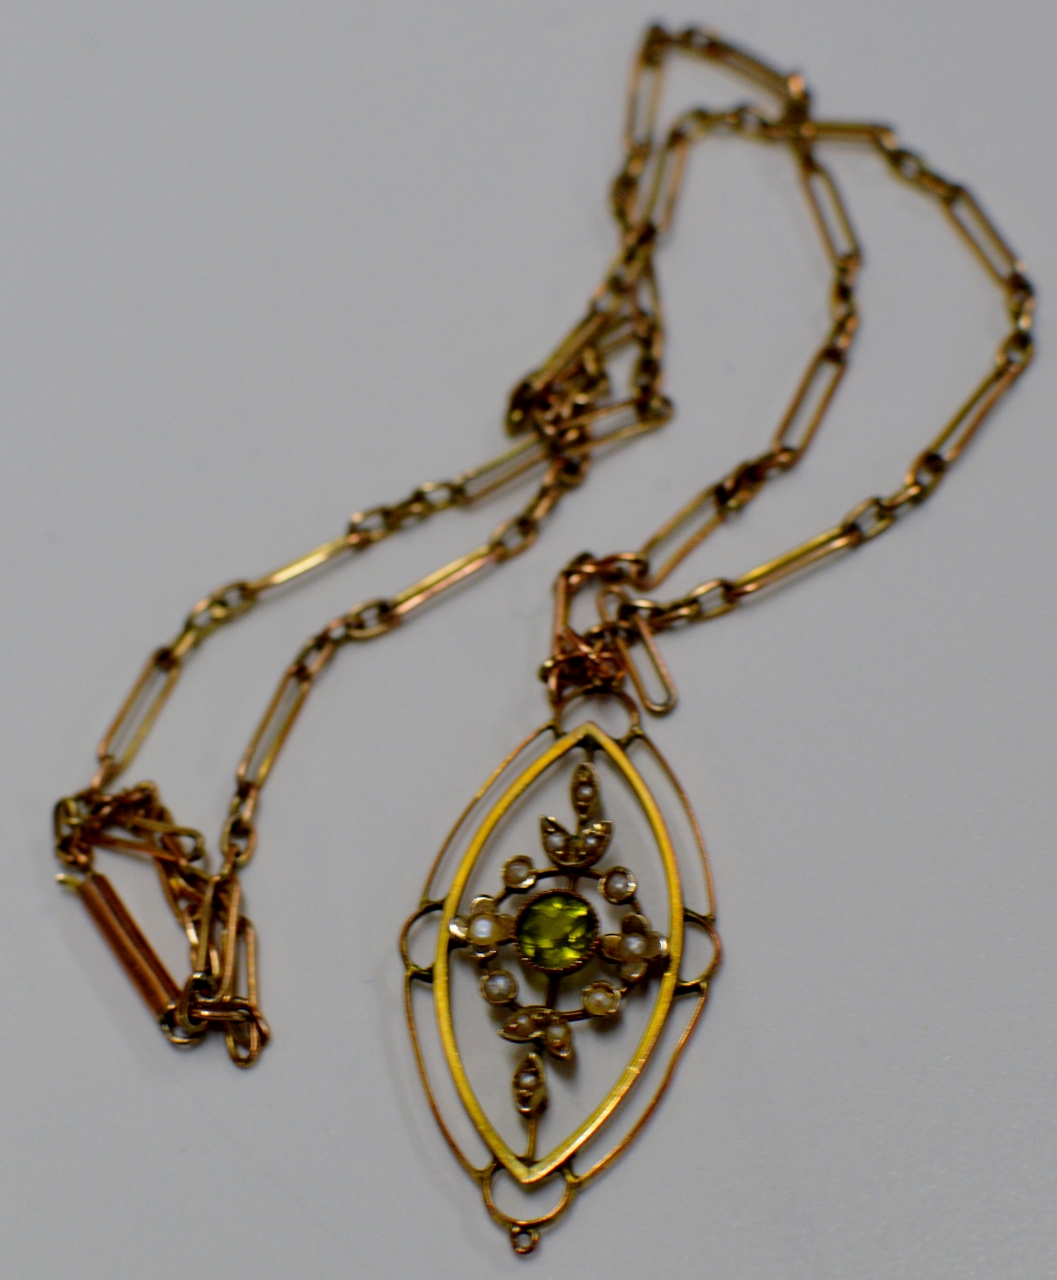 AN ART NOUVEAU STYLE PERIDOT & SEED PEARL SET PENDANT ON 9 CARAT GOLD CHAIN - APPROXIMATE WEIGHT =